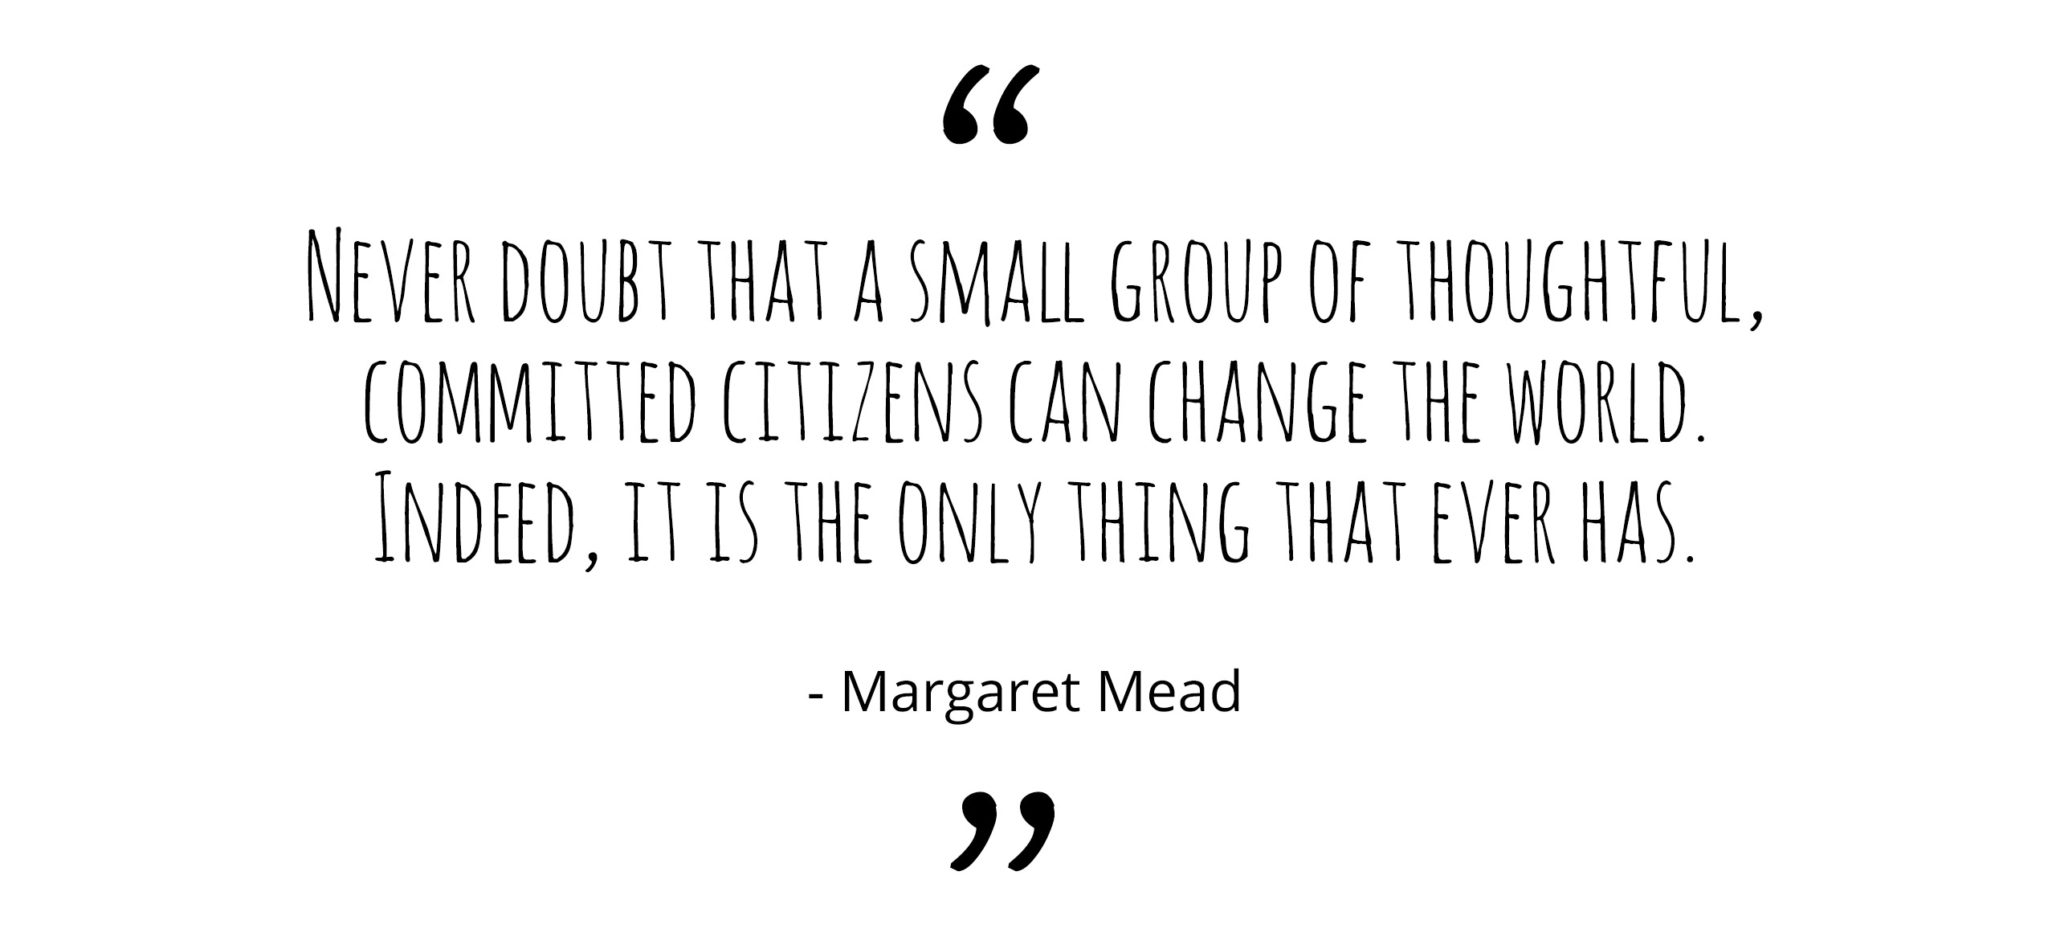 Never doubt that a small group of thoughtful, committed citizens can change the world. Indeed, it’s the only thing that ever has.